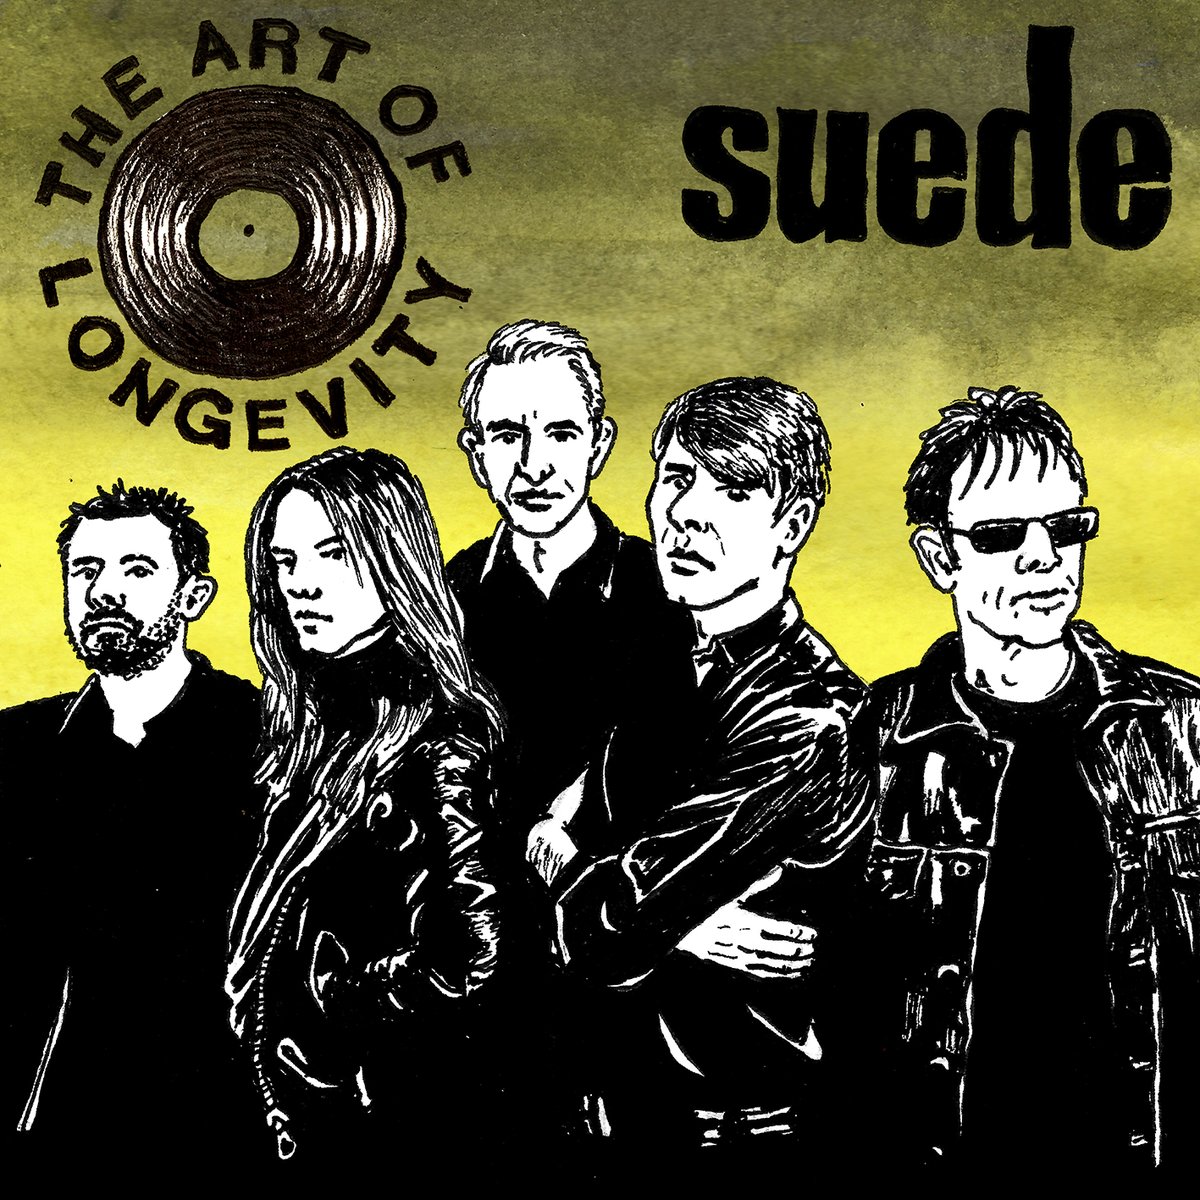 Hear Brett discuss Suede's career and recently released album AUTOFICTION on a new episode of The Art Of Longevity podcast. Listen on Spotify, Amazon, Apple, and more via @SongSommelier: songsommelier.com/suede-art-of-l… -SuedeHQ